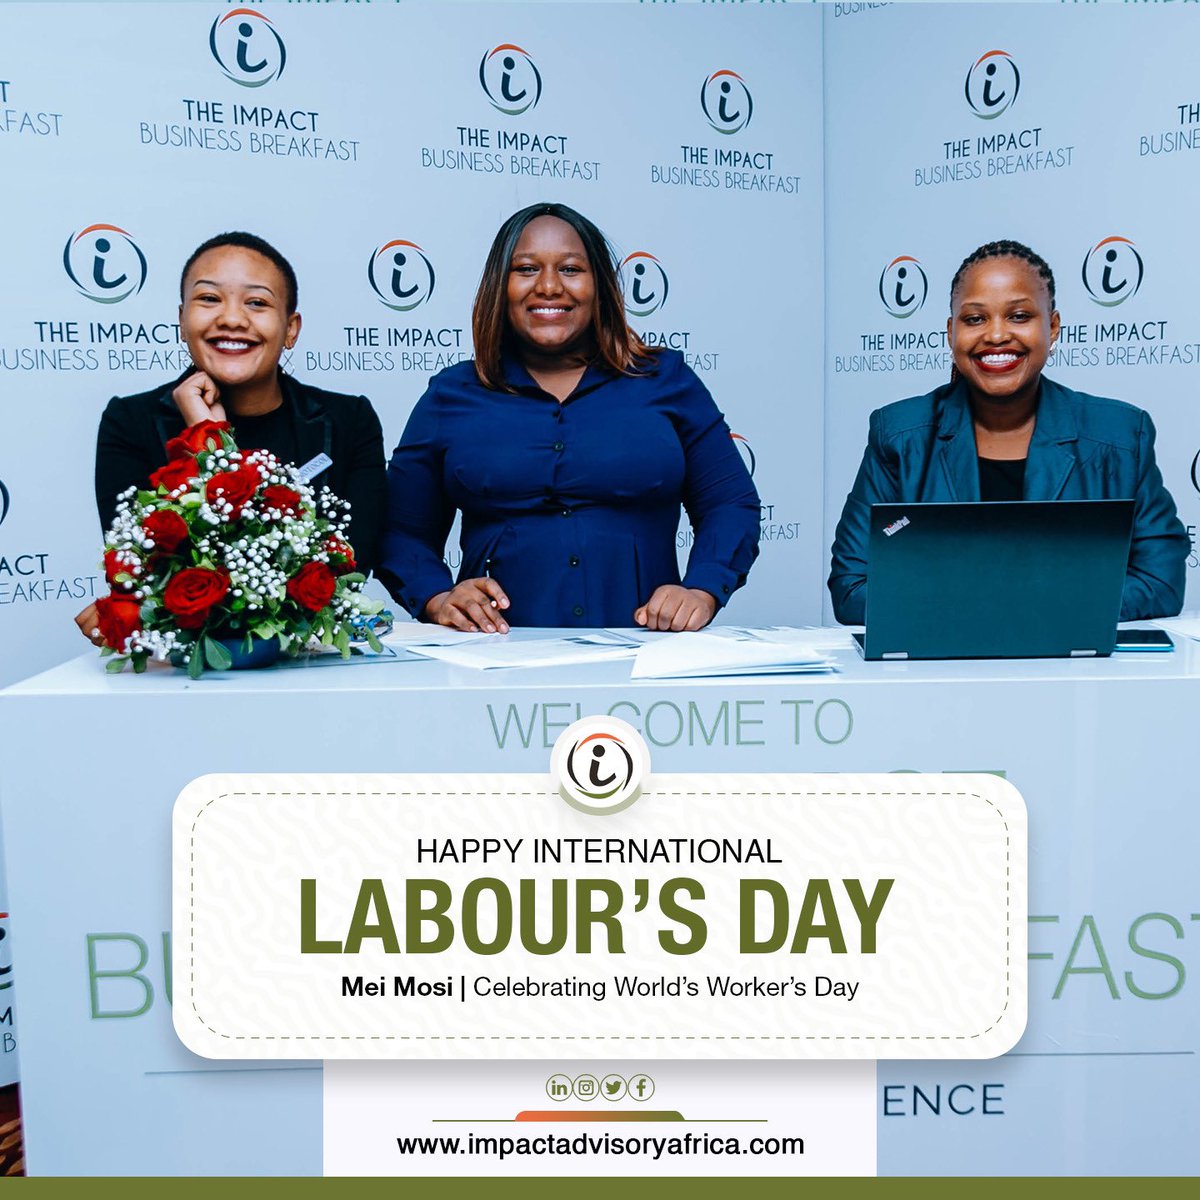 Happy Labour's Day to all the dedicated individuals whose hard work and perseverance drive our communities forward.

Today, we celebrate your contributions to building a better world. May your efforts be recognized and rewarded, today and every day!

#WorkersDay #ThankYouWorkers